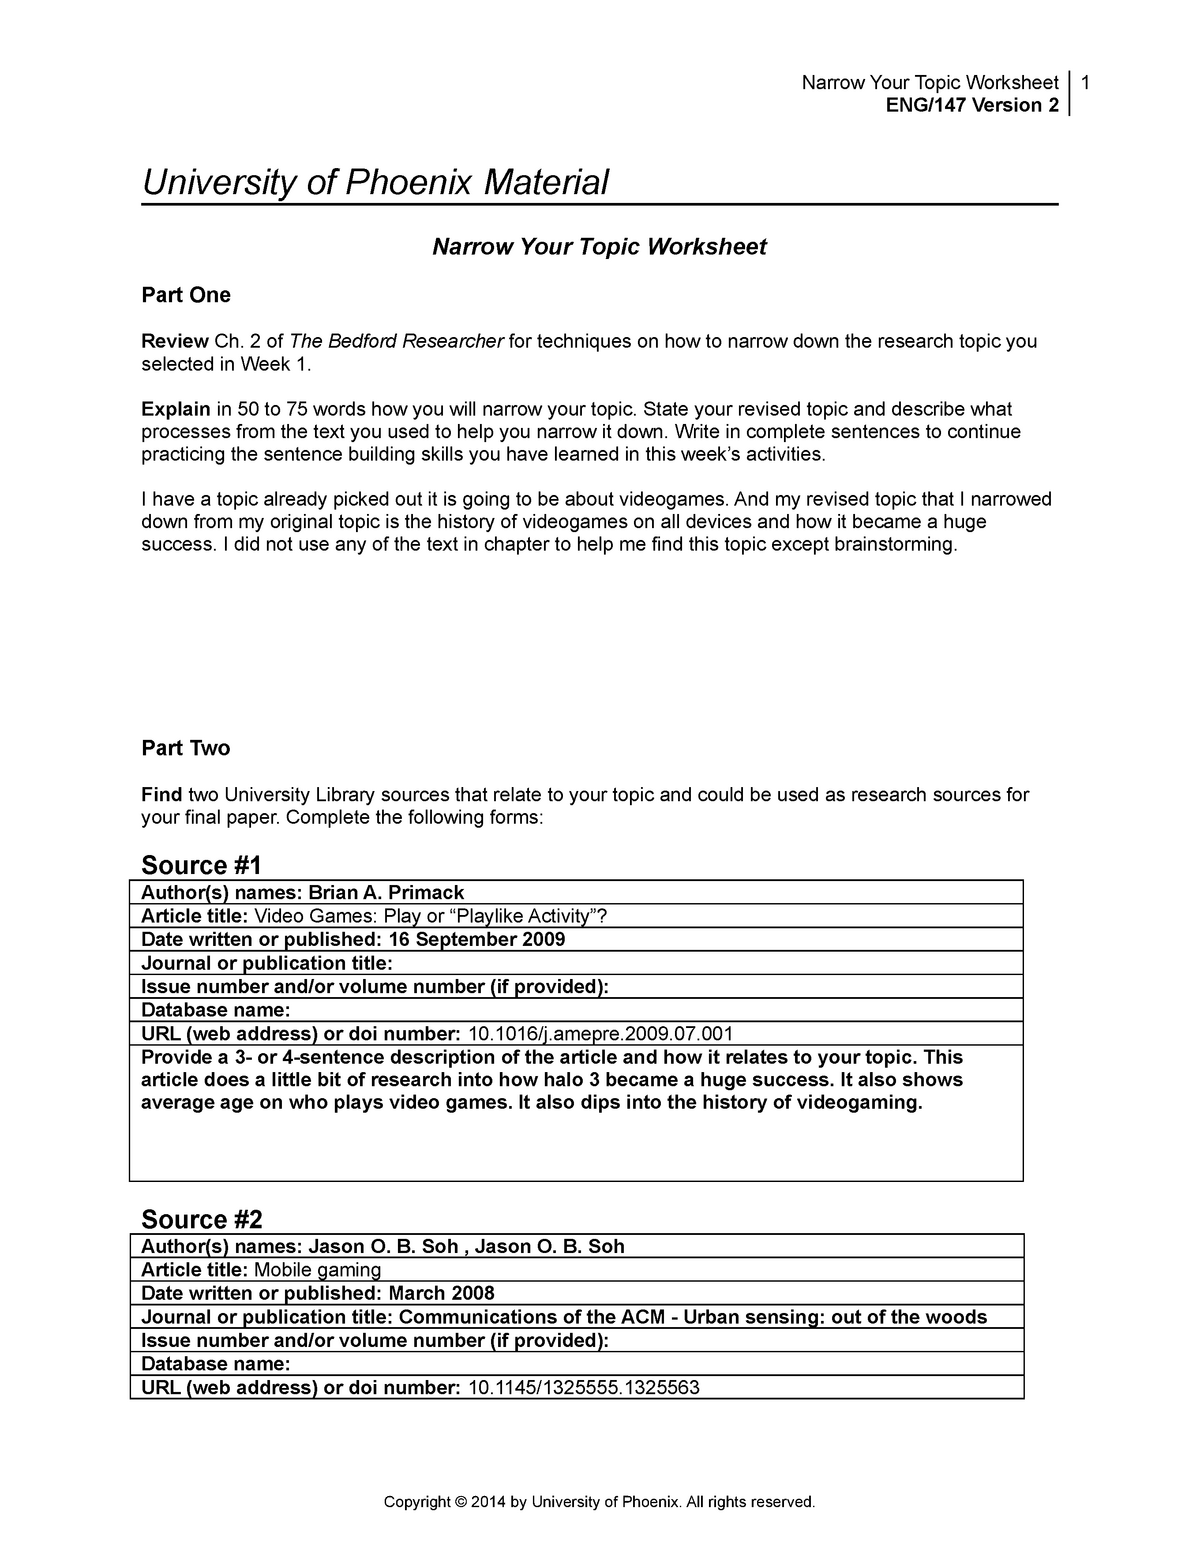 narrowing a research topic worksheet